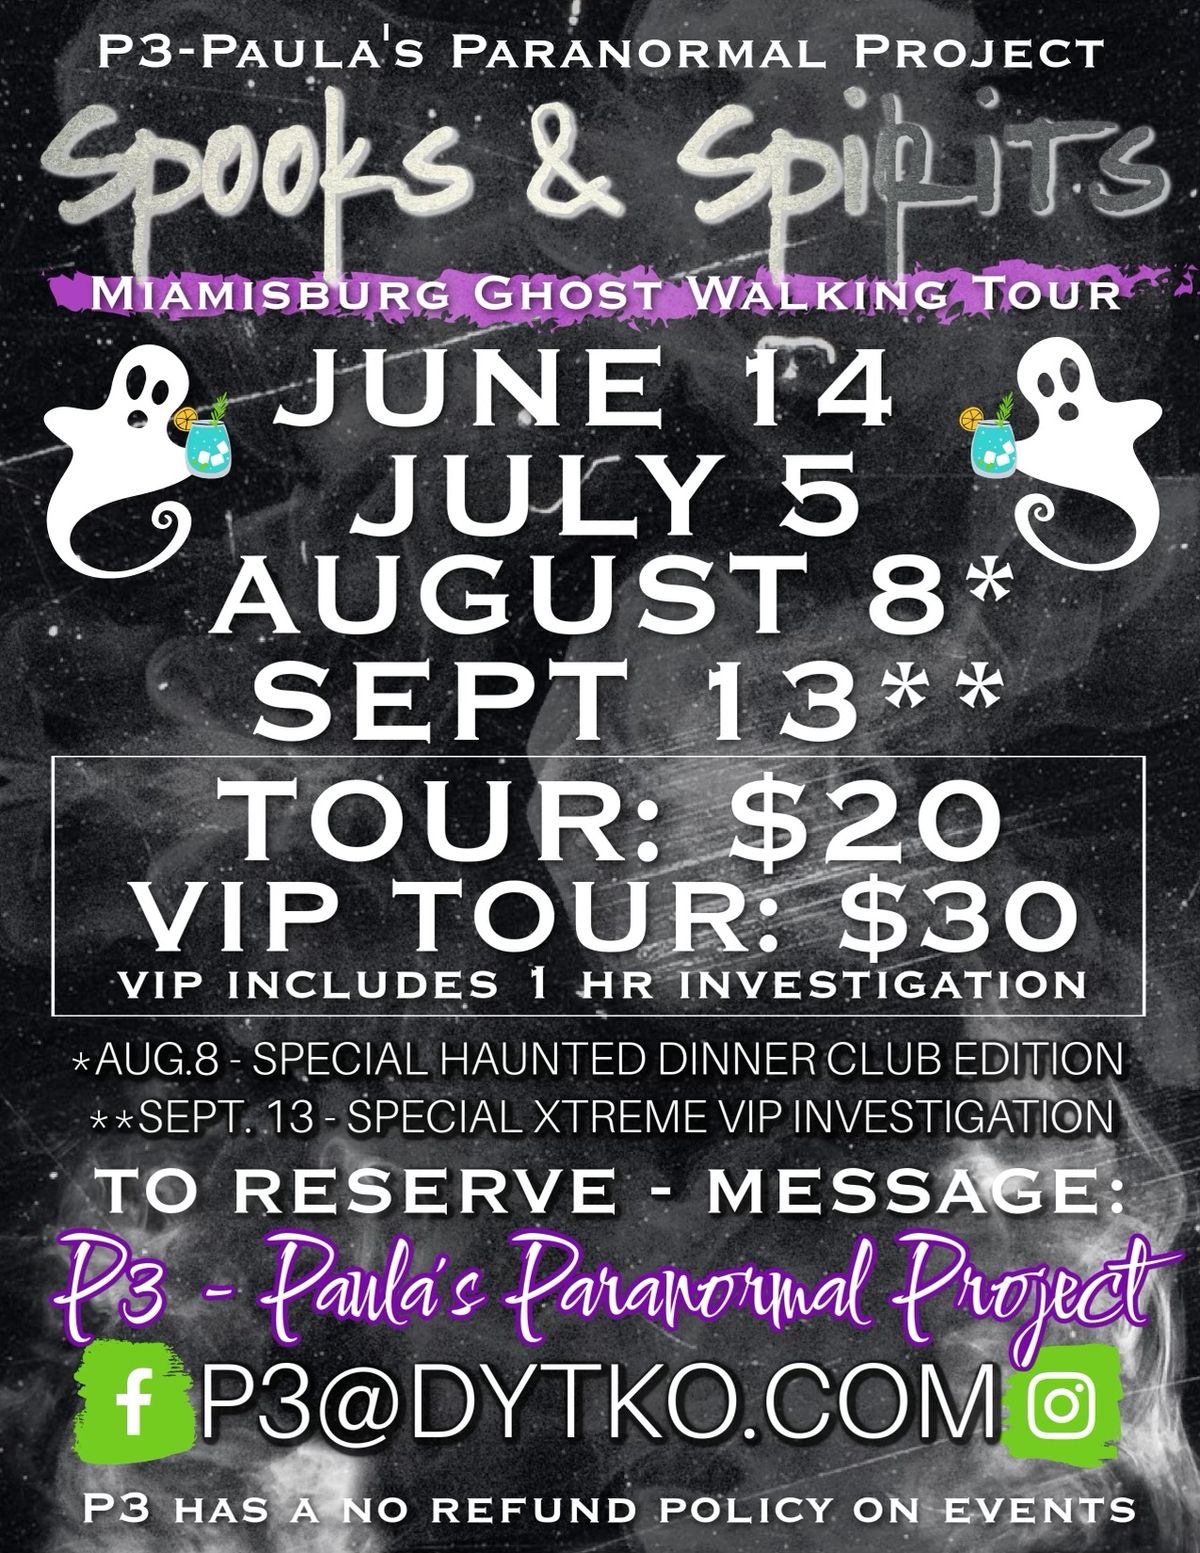 ***Special Haunted Dinner Club with Miamisburg Spooks & Spirits Ghost Walking Tour